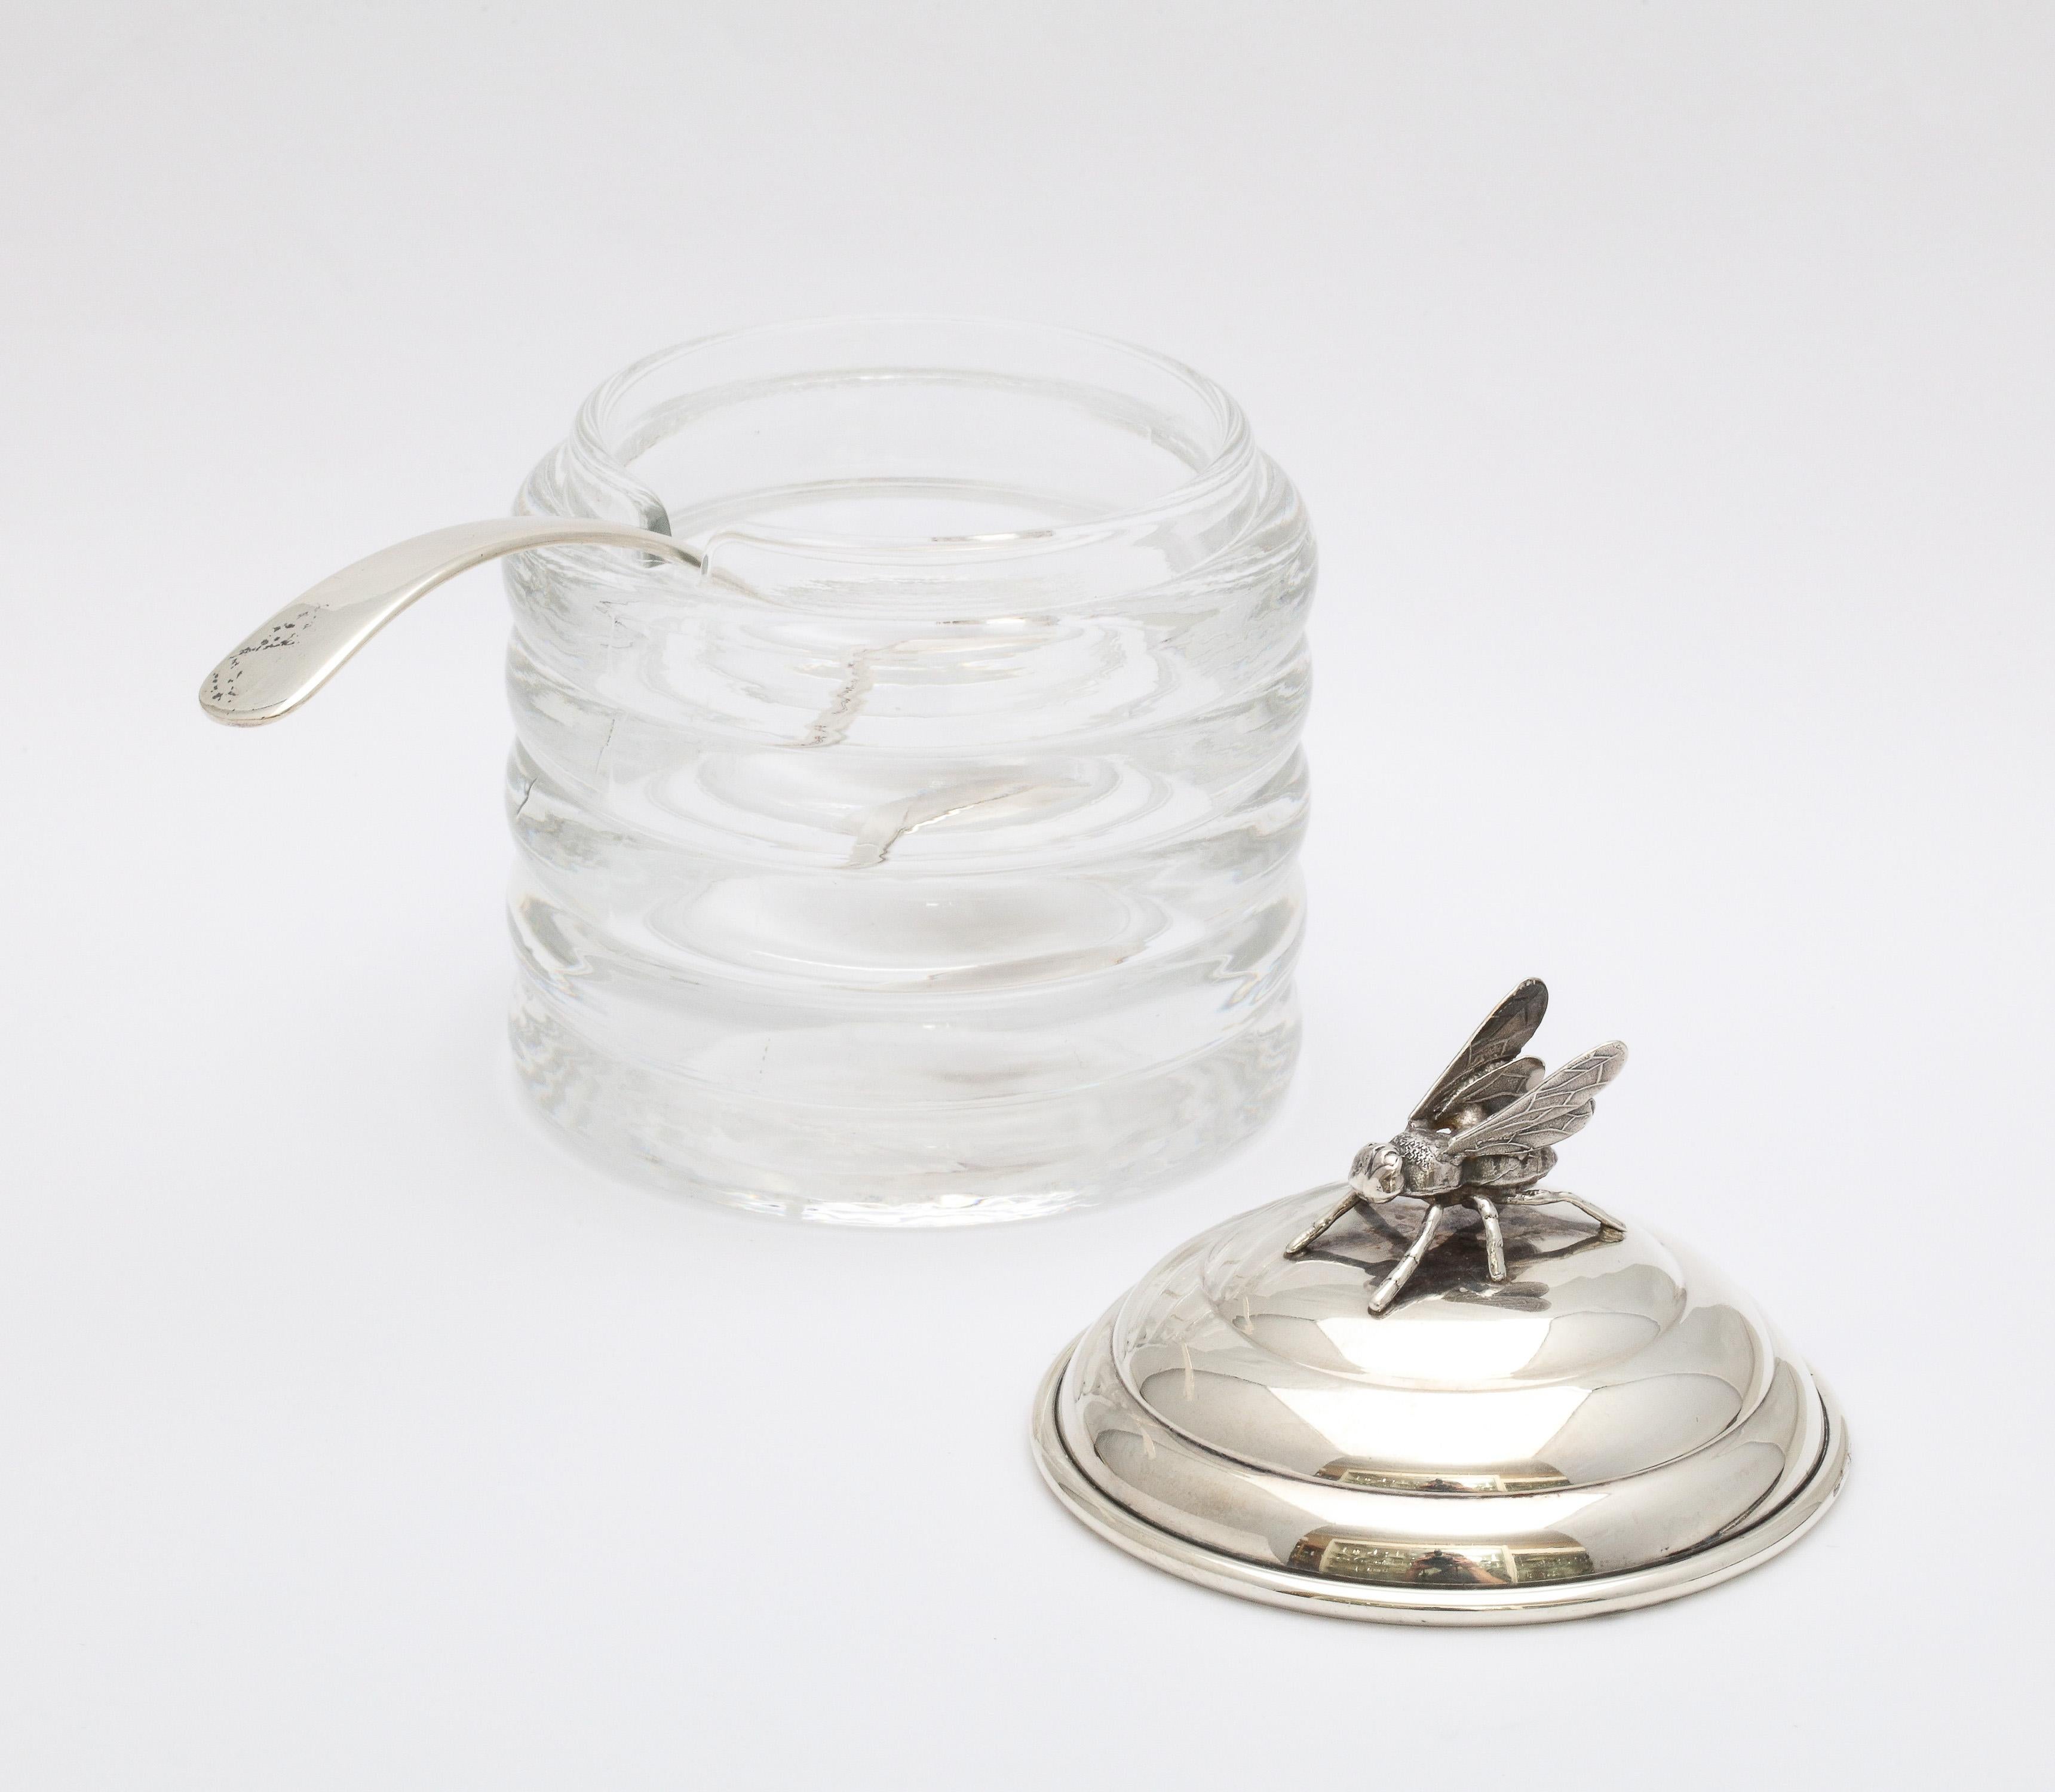 Art Deco Period Sterling Silver-Mounted Beehive-Form Honey Jar With Spoon 6